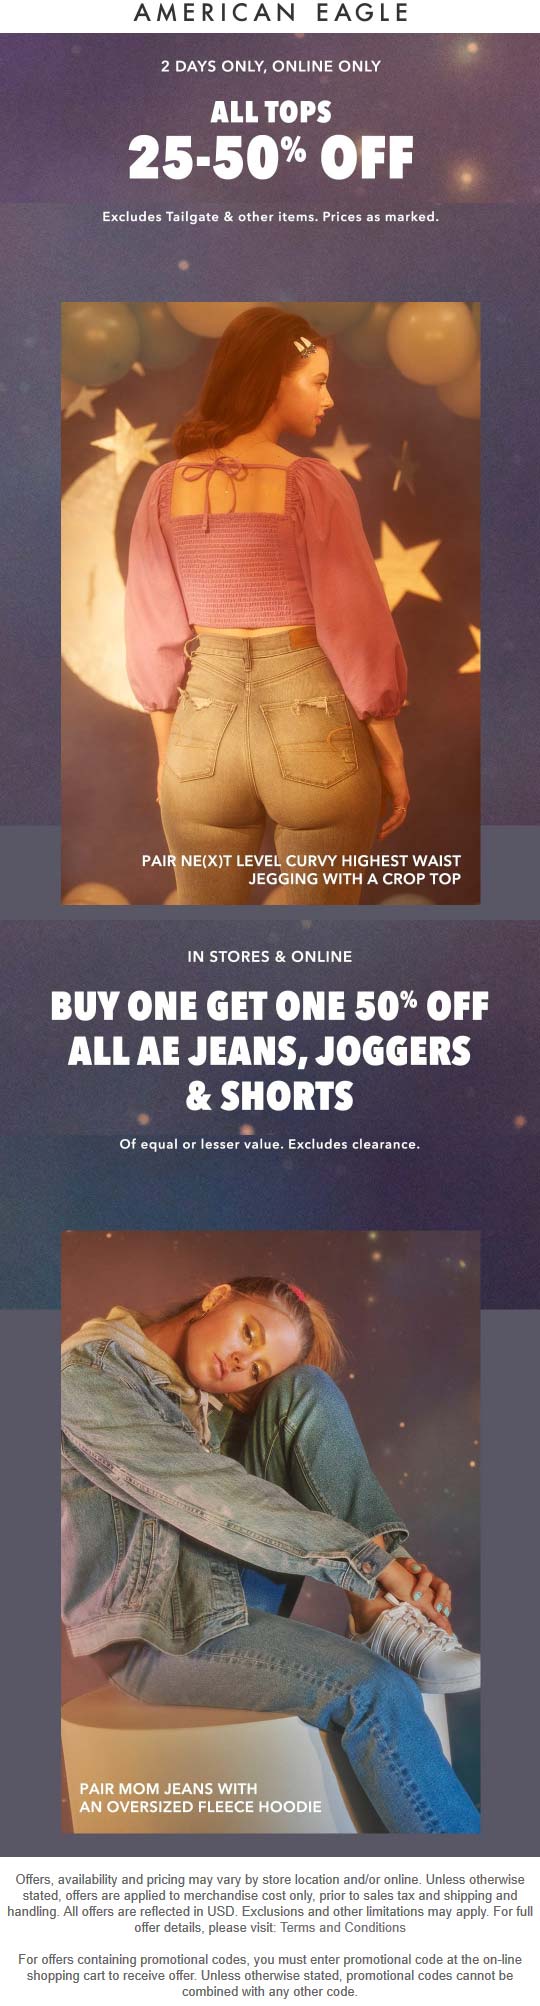 American Eagle coupons & promo code for [January 2022]